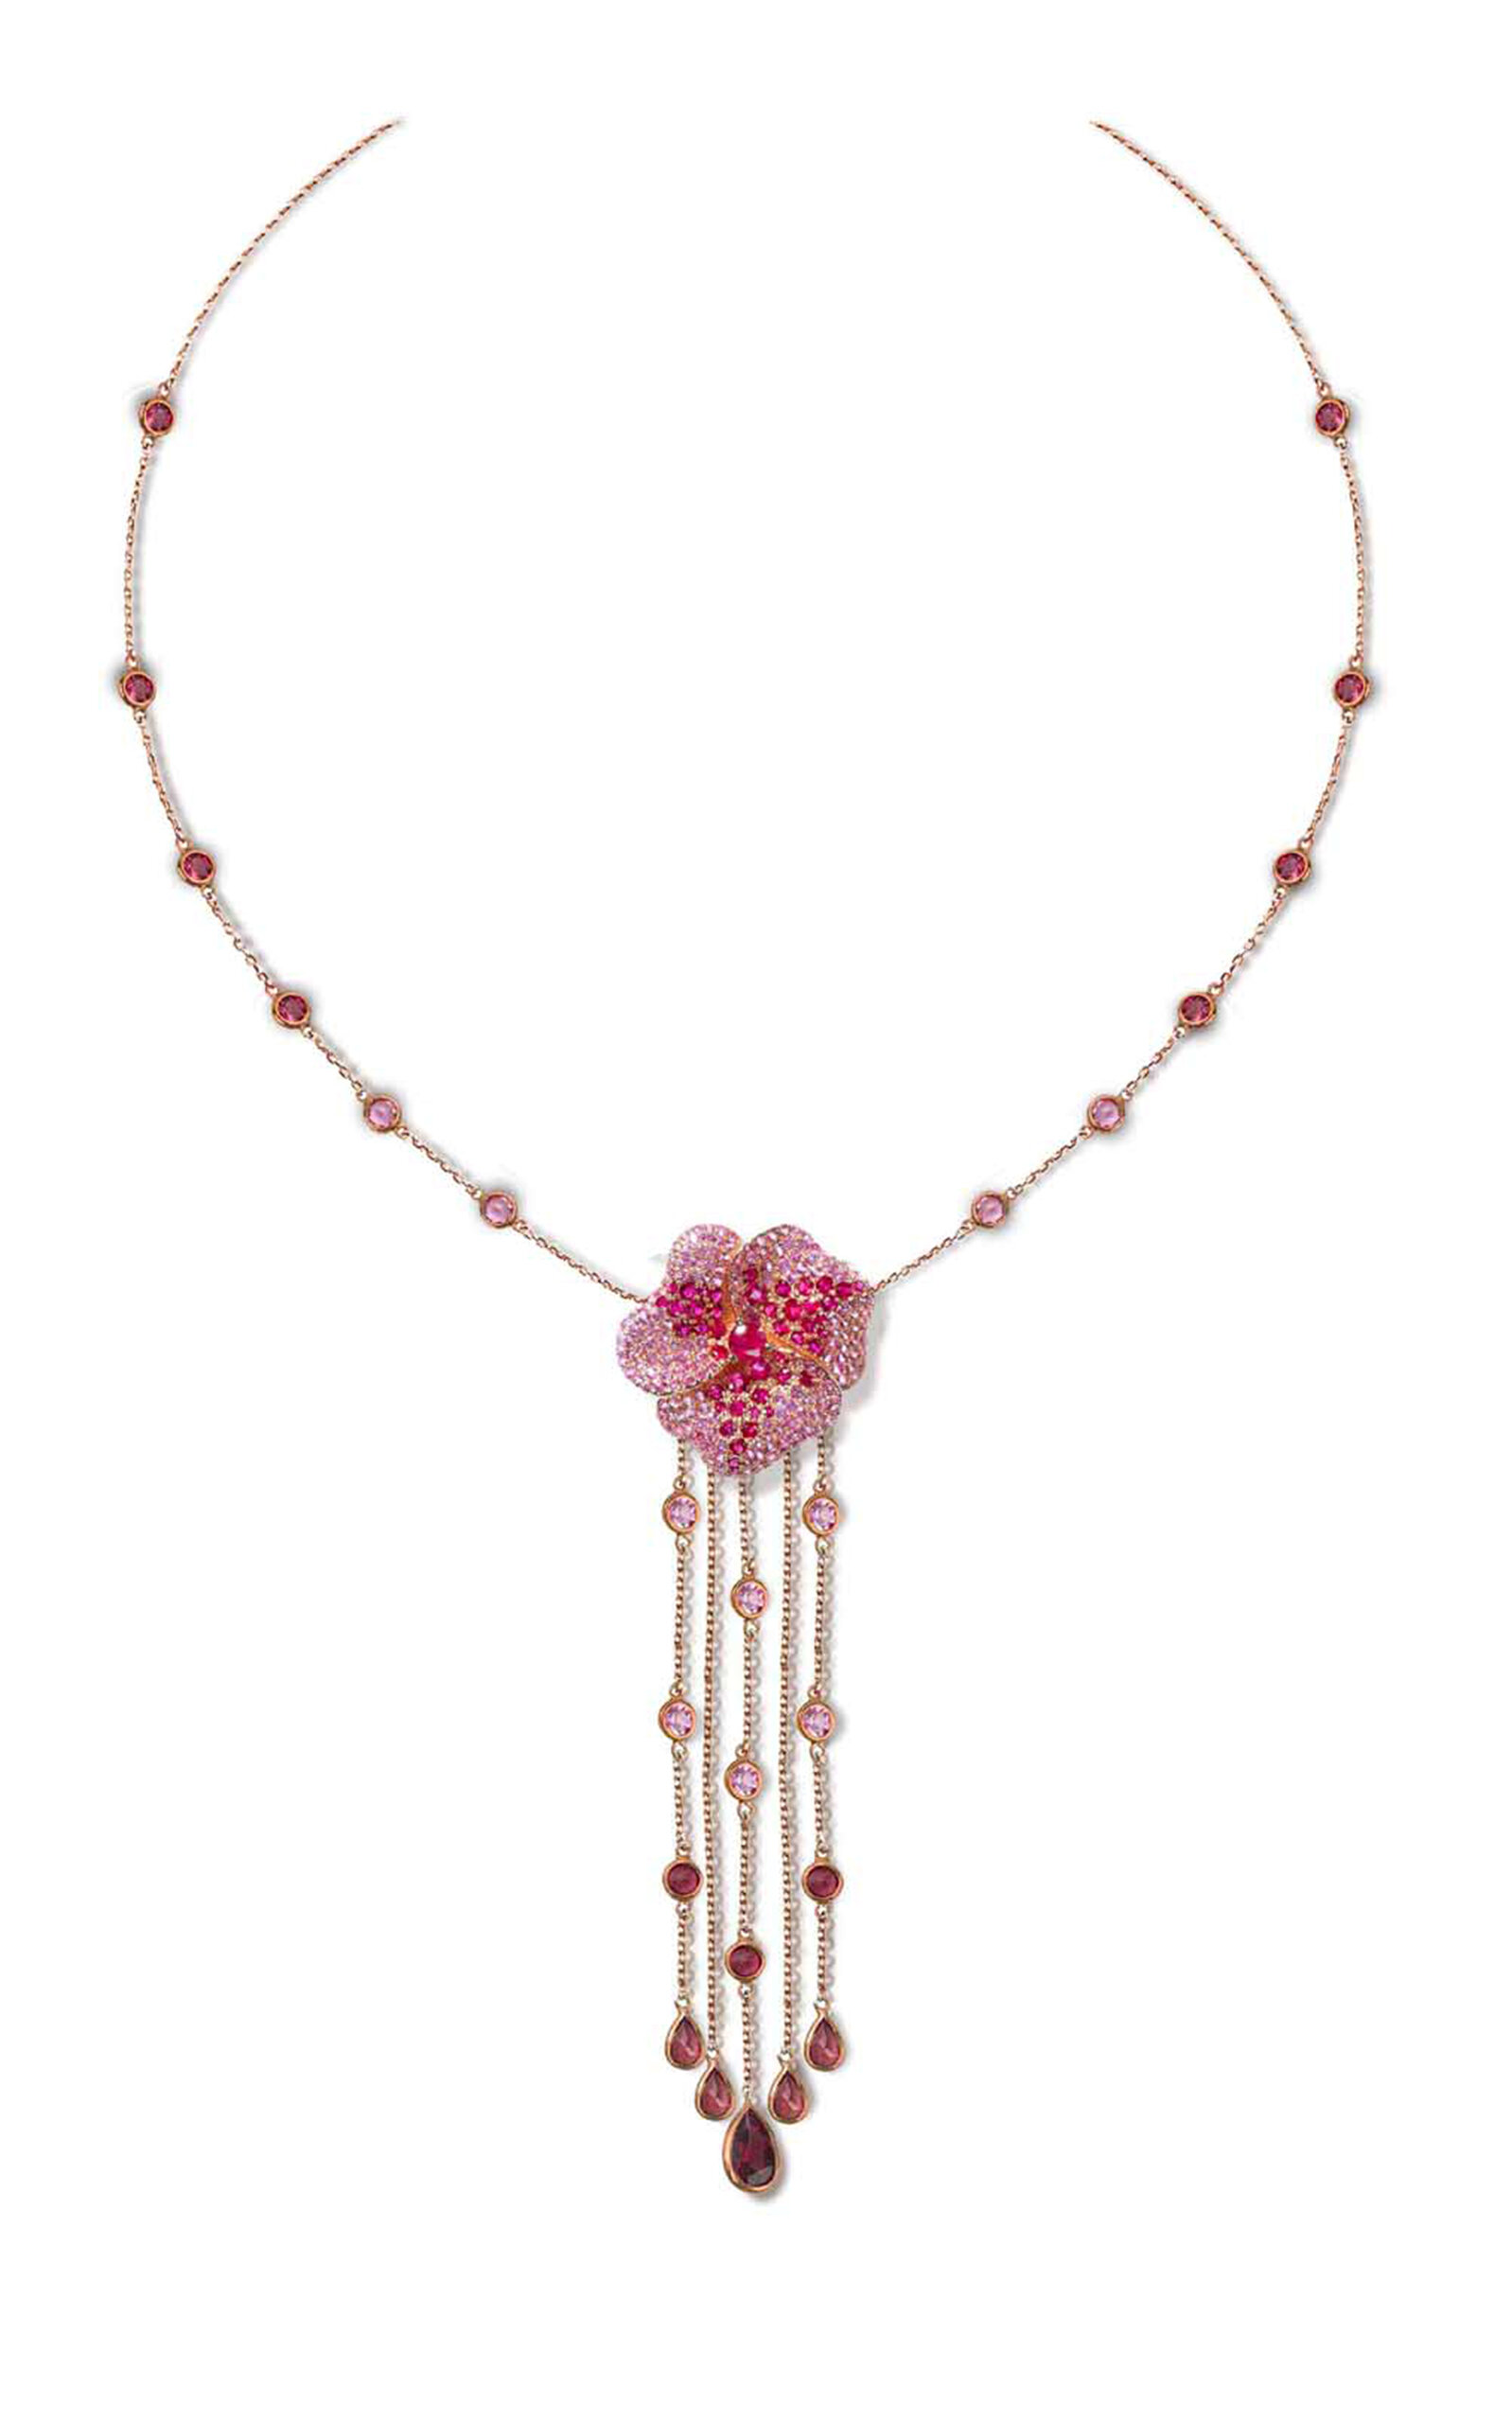 As29 One Of A Kind Bloom 18k Rose Gold; Sapphire And Rhodorite Necklace In Pink